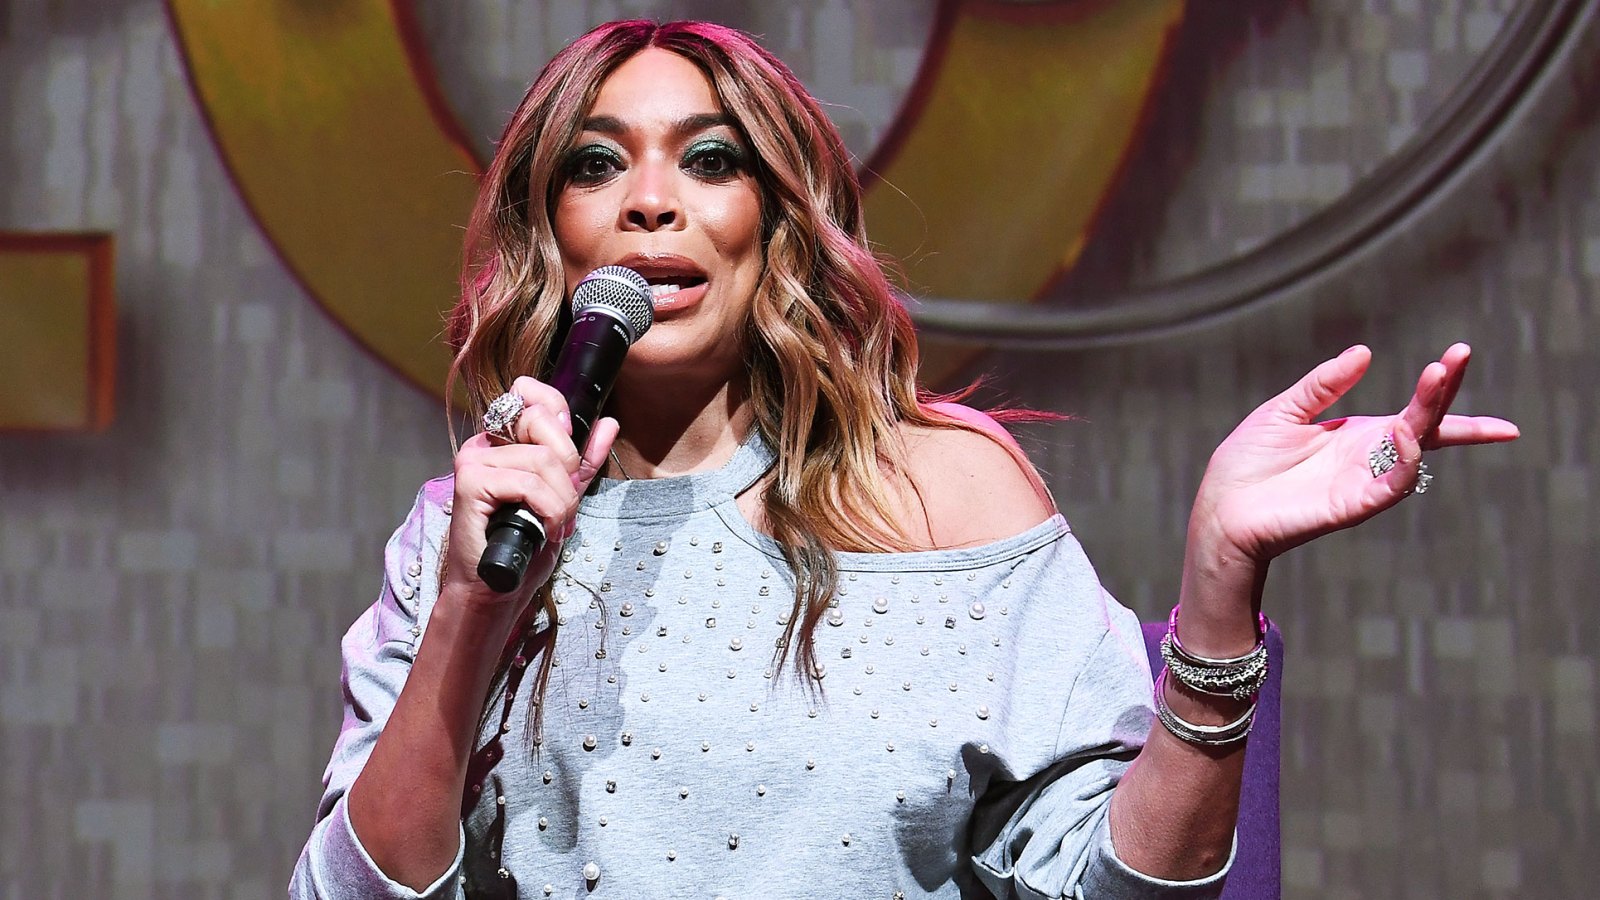 Wendy Williams Set to Return to ‘The Wendy Williams Show’ After Apologizing for ‘Less Than Stellar’ Shows